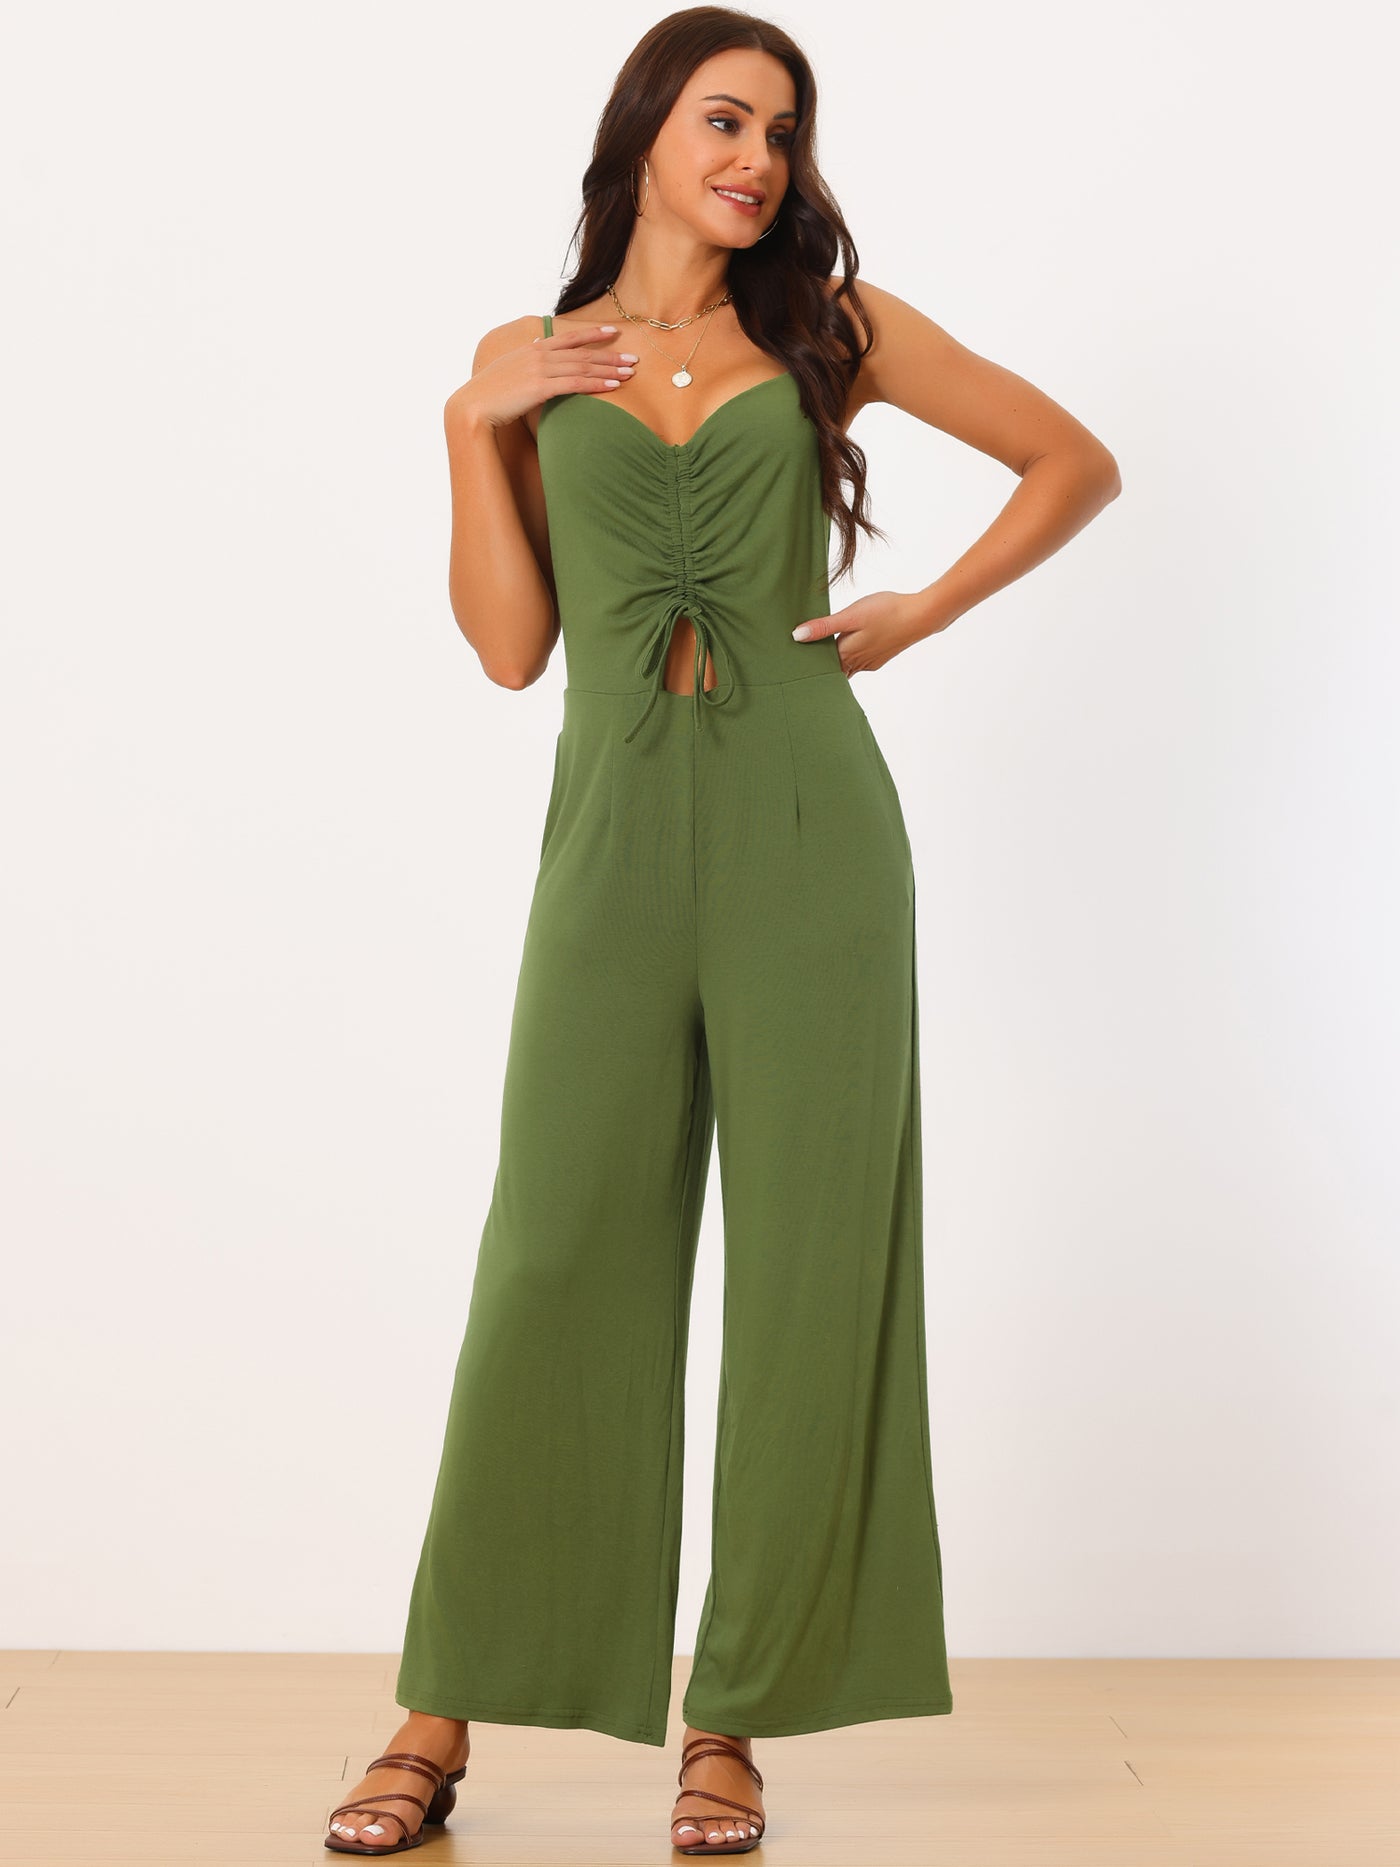 Bublédon Spaghetti Straps Ruched Drawstring Wide Leg Romper Casual Jumpsuits with Pockets